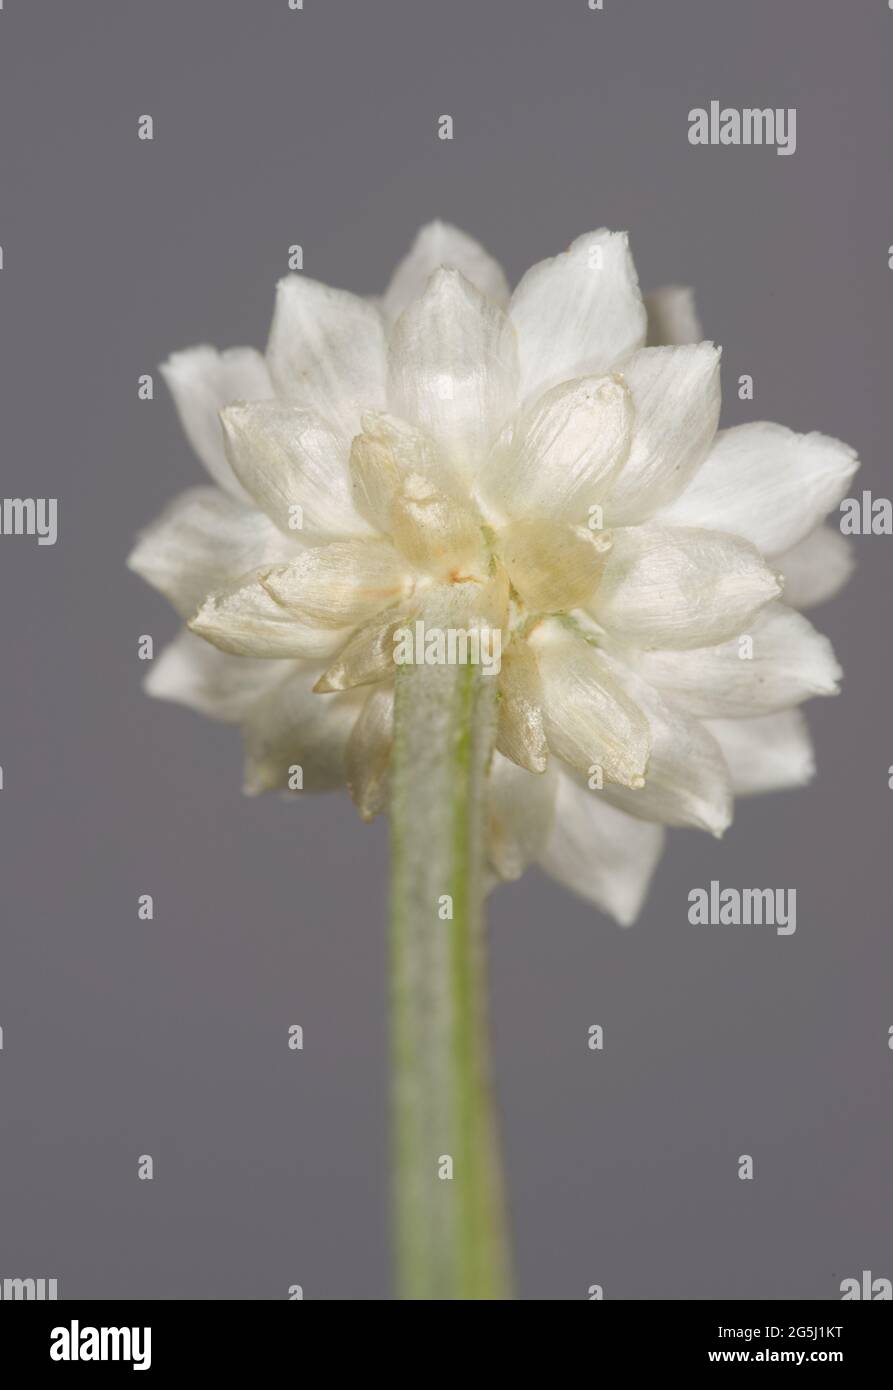 back of a white flower close up Stock Photo